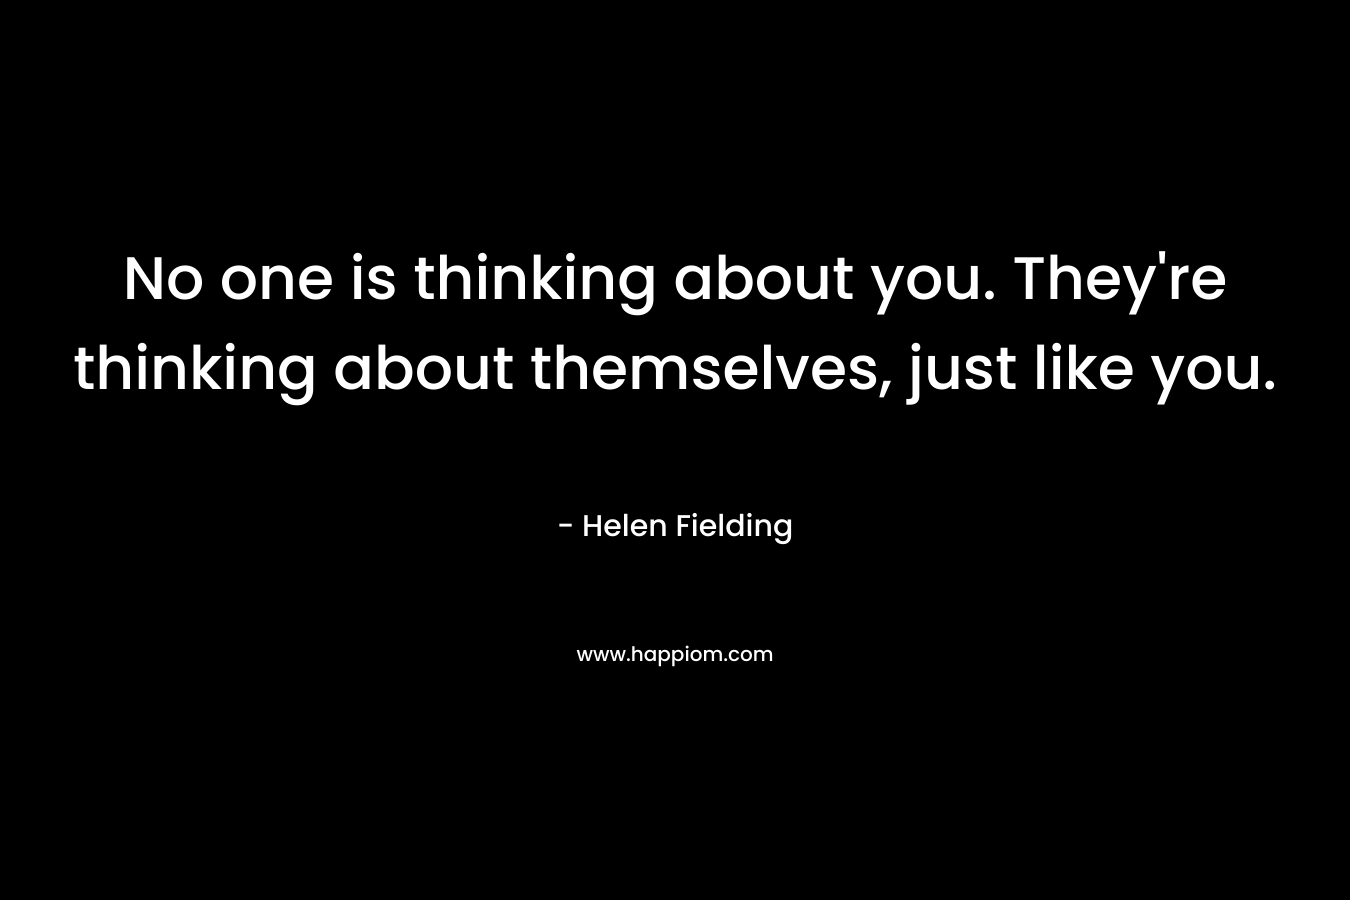 No one is thinking about you. They're thinking about themselves, just like you.